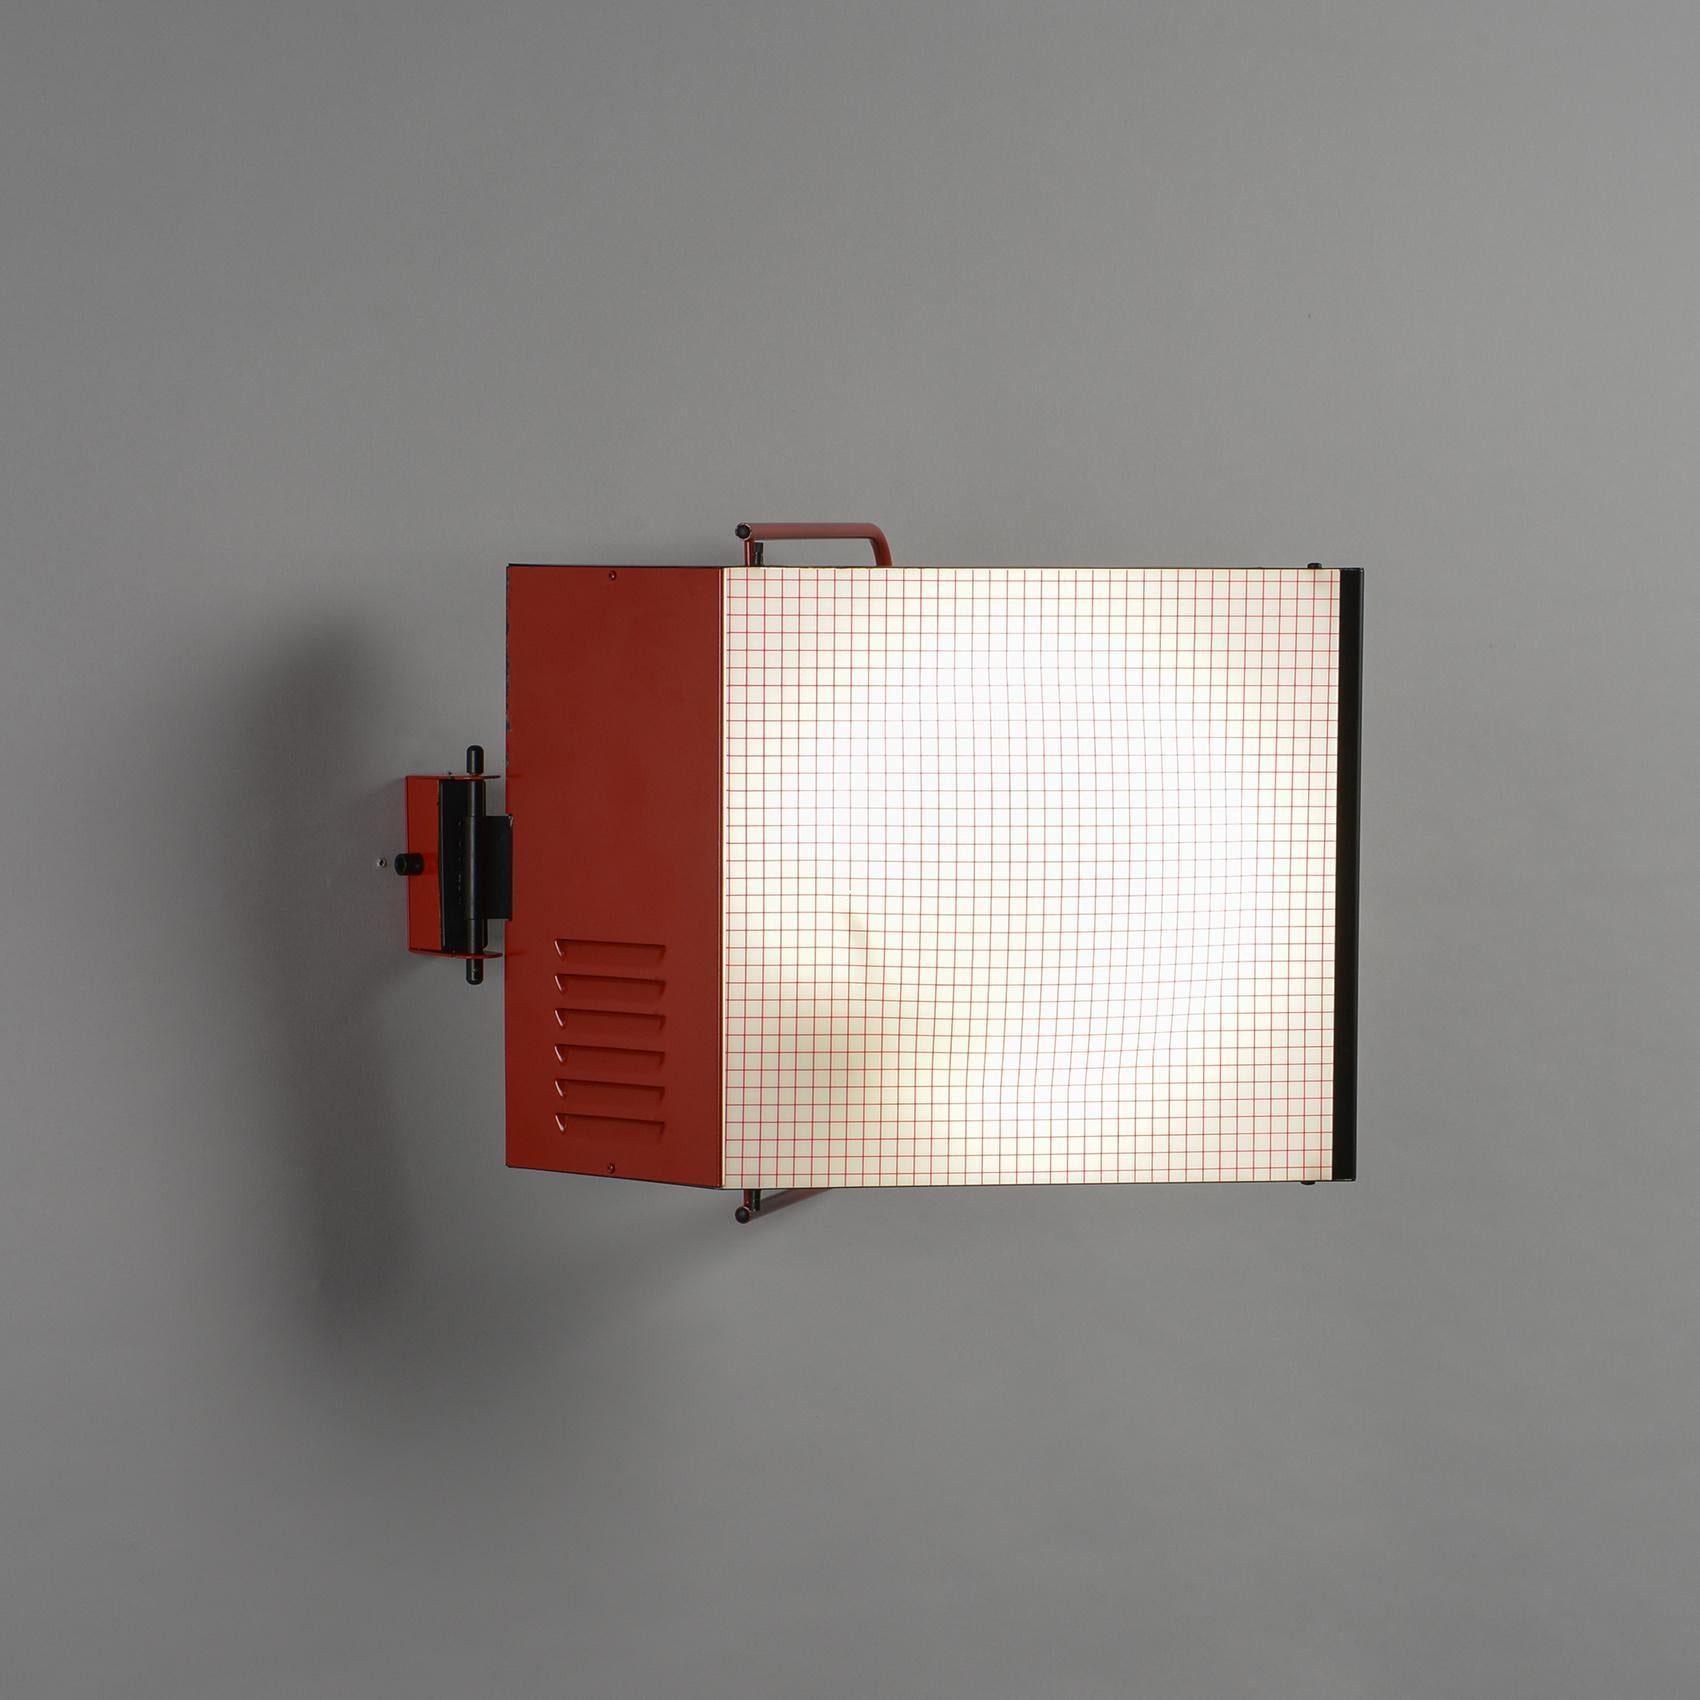 Pair of Wall Lights, Model Cabriolet by Stilnovo, circa 1980 For Sale 1